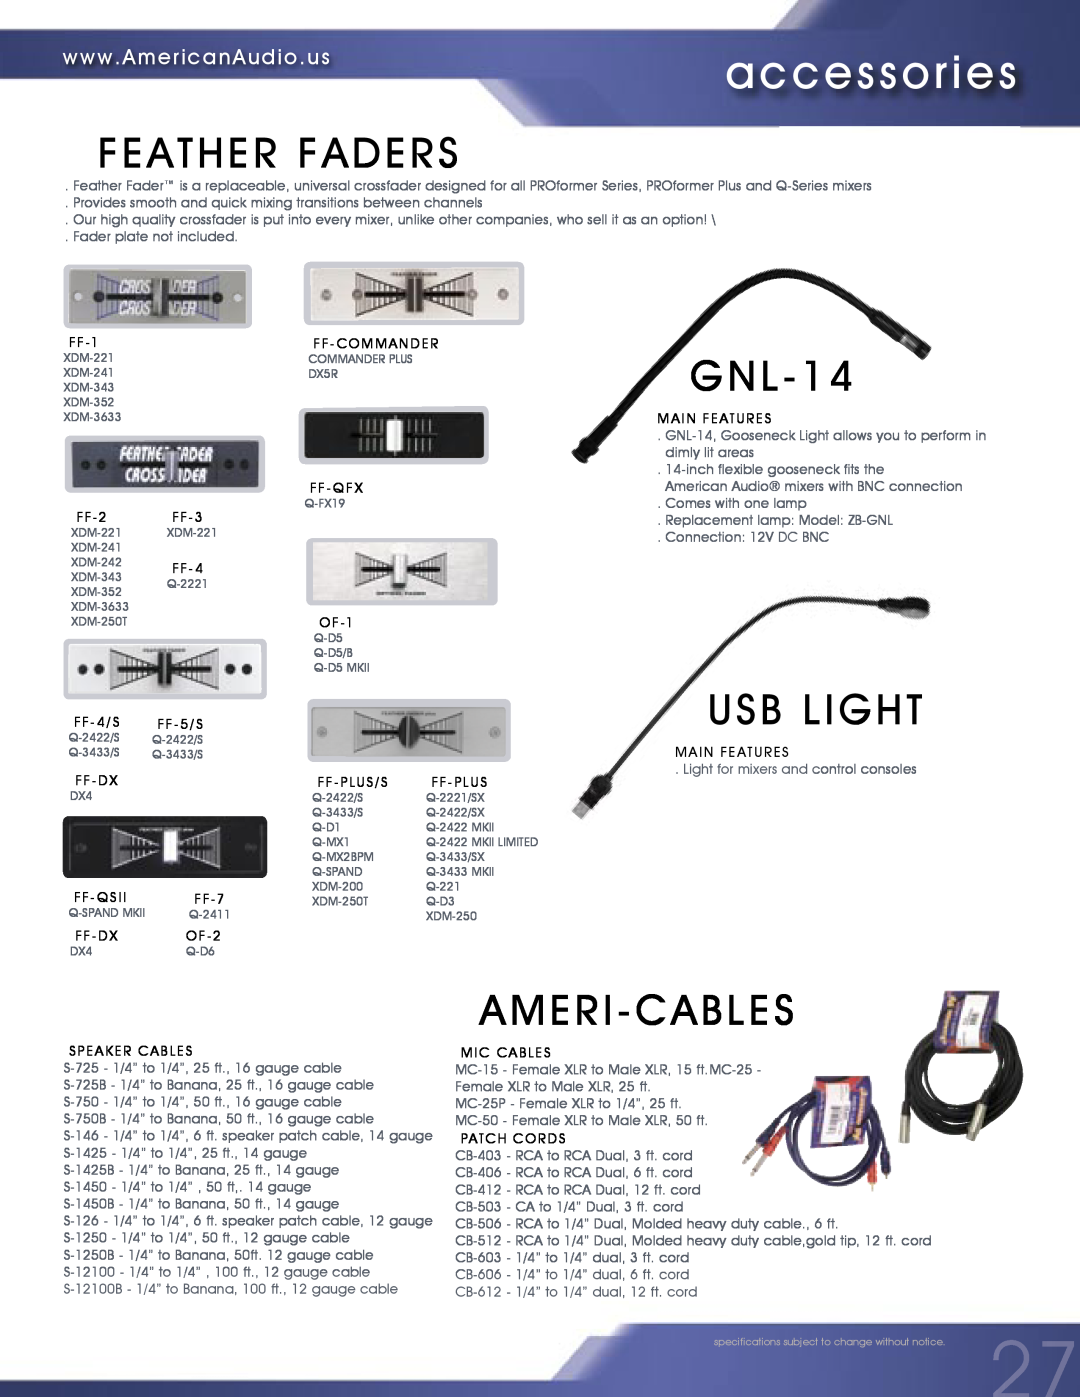 American Audio MCD-810 manual accessories, Feather Faders, GNL-14, Usb Light, Ameri-Cables 